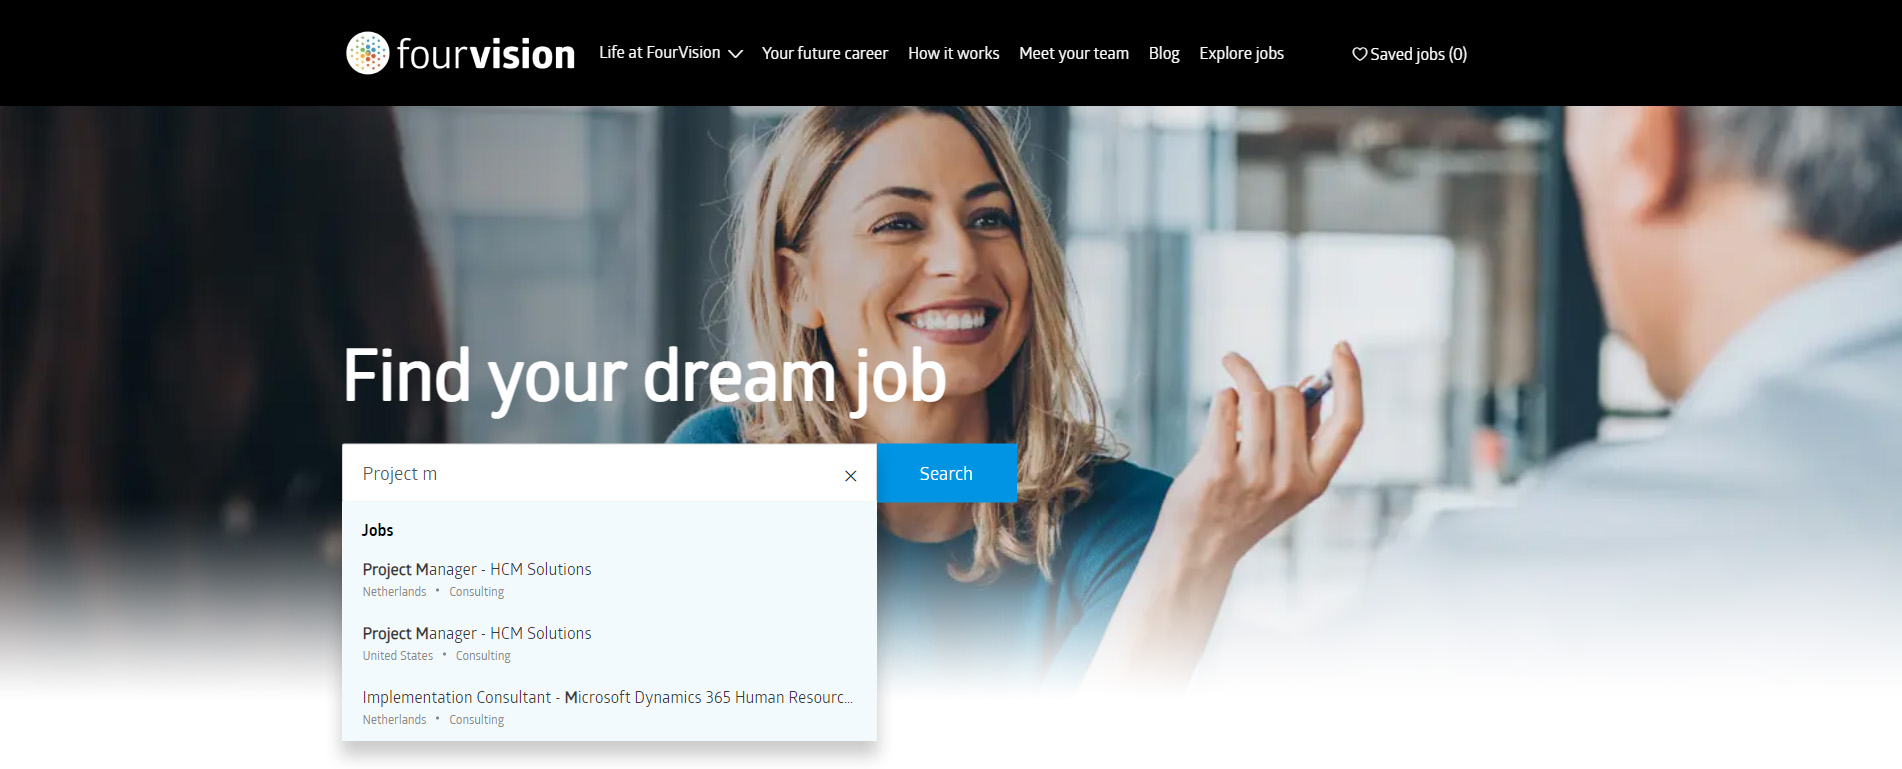 FourVision career site